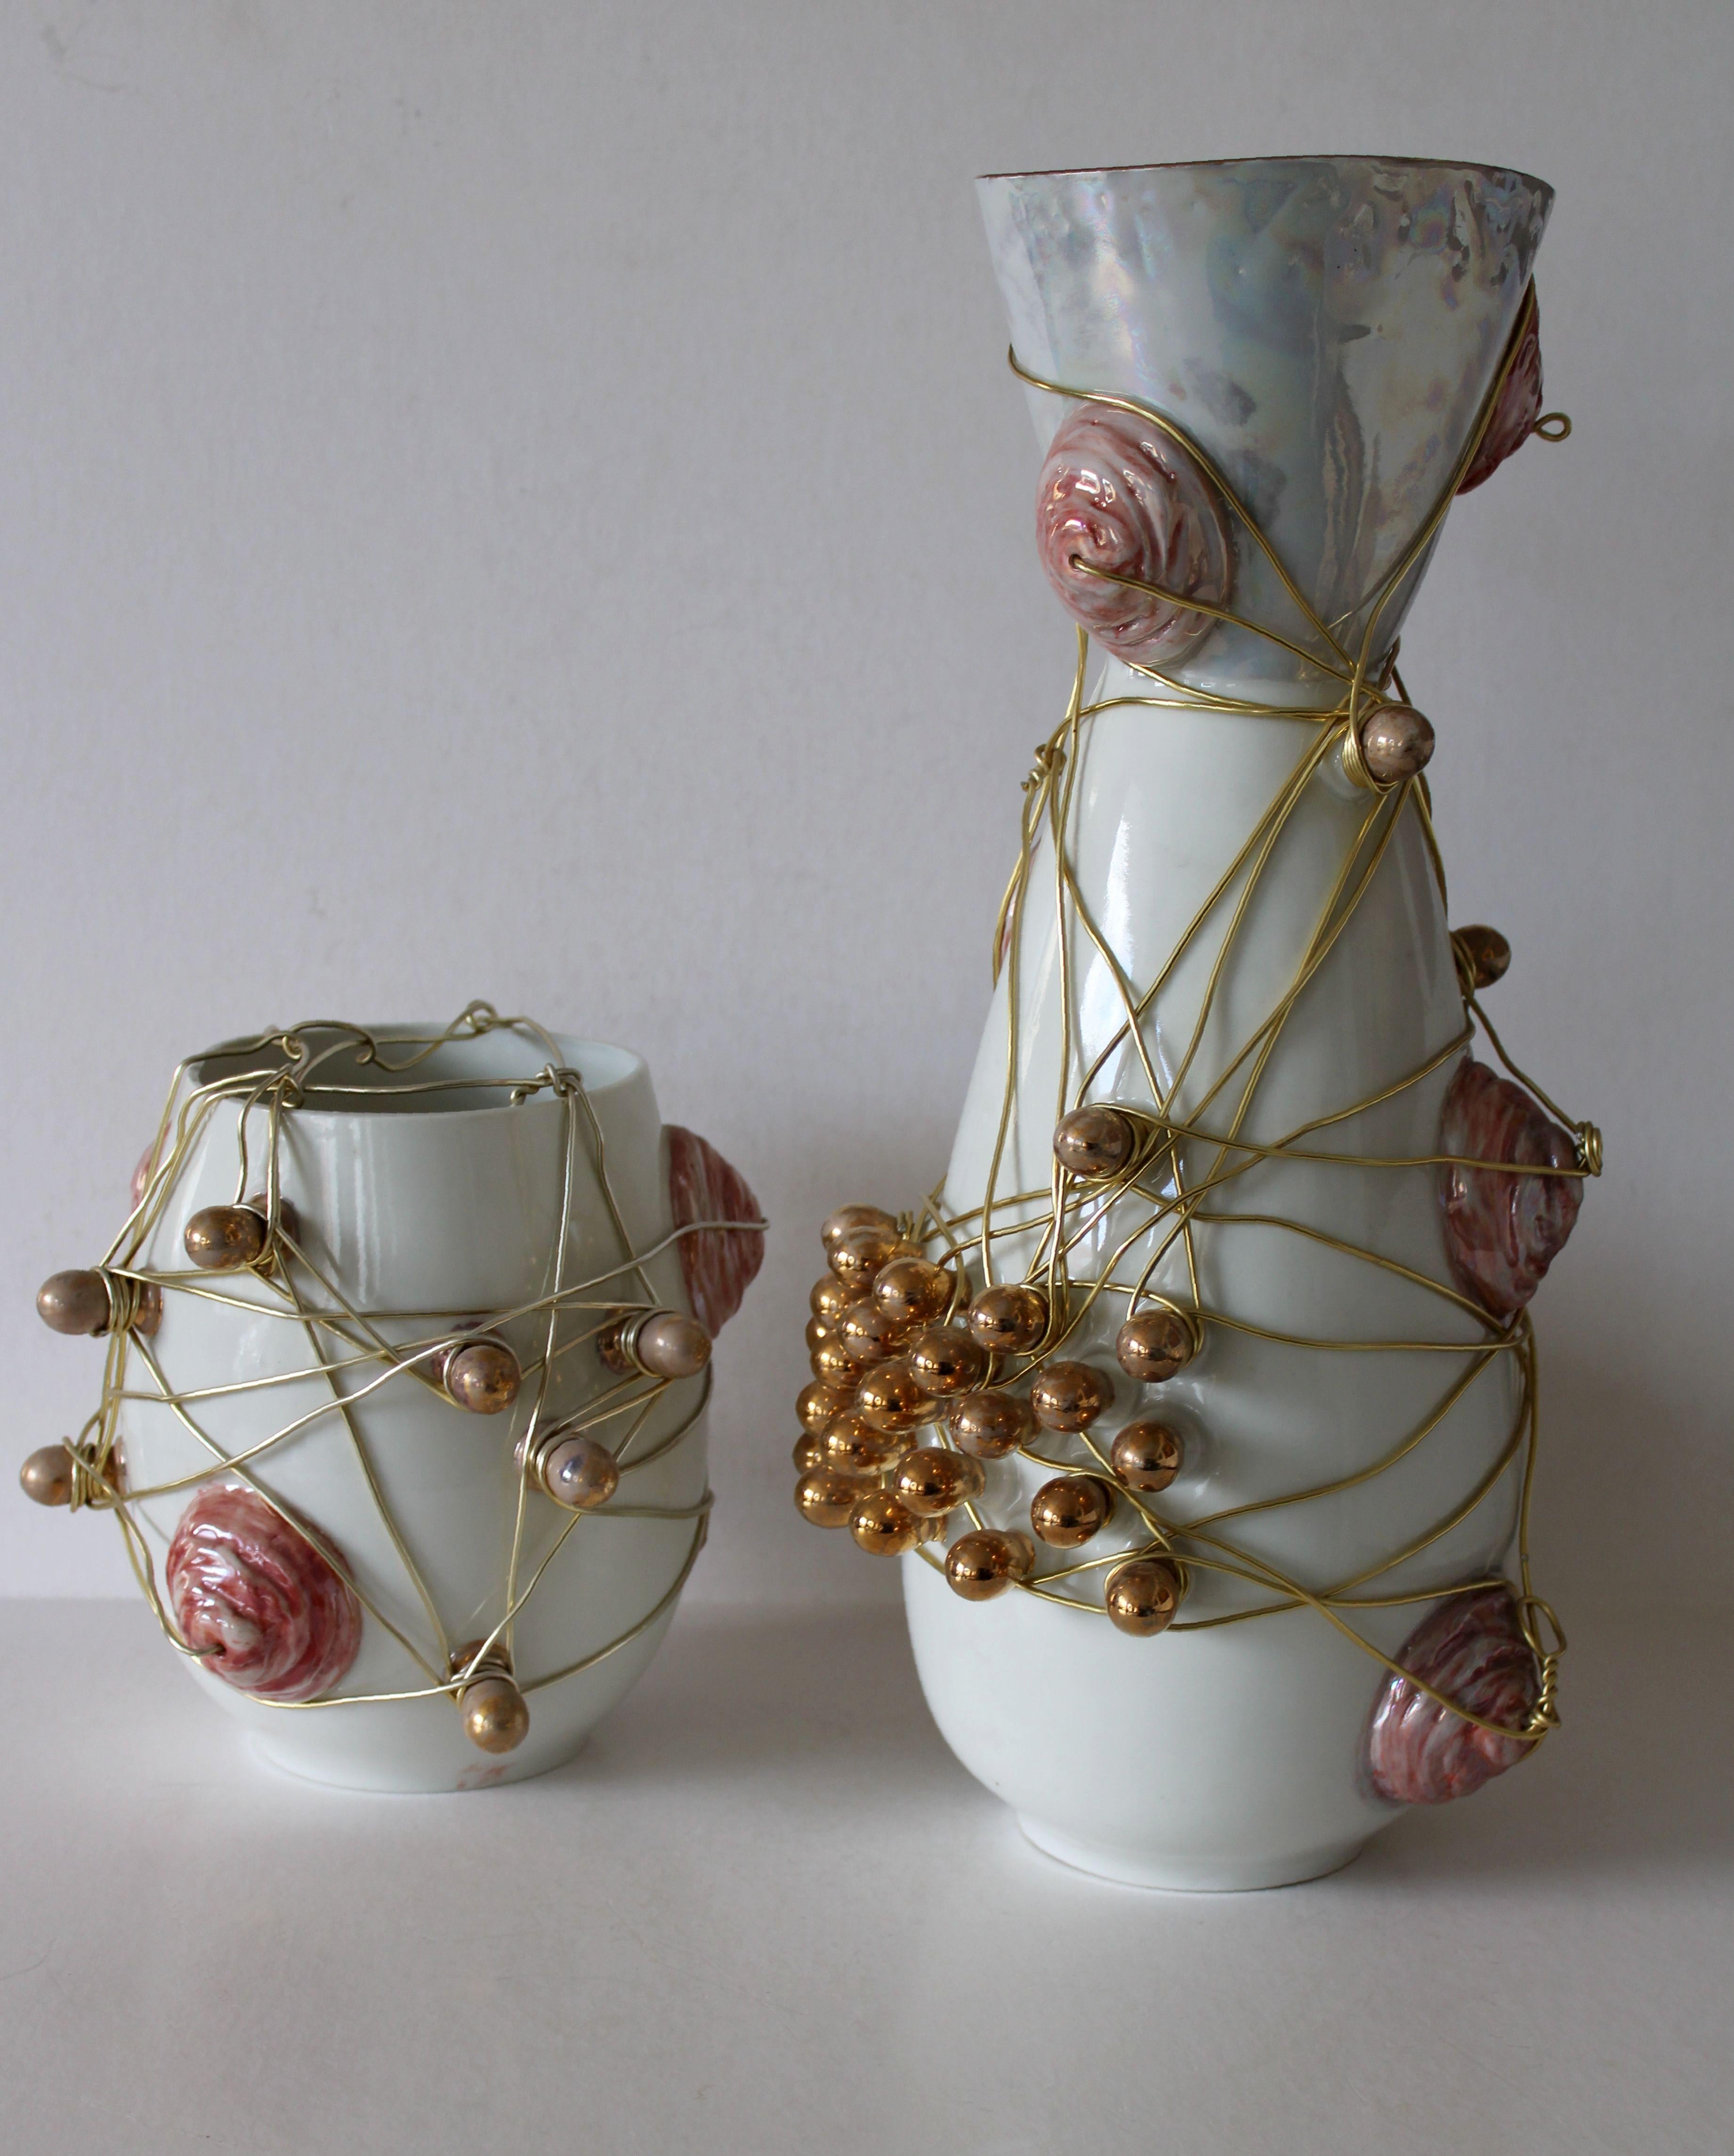 Vases with wires - set of two  2009, porcelain, wire, h 19.5 cm, h 43 cm